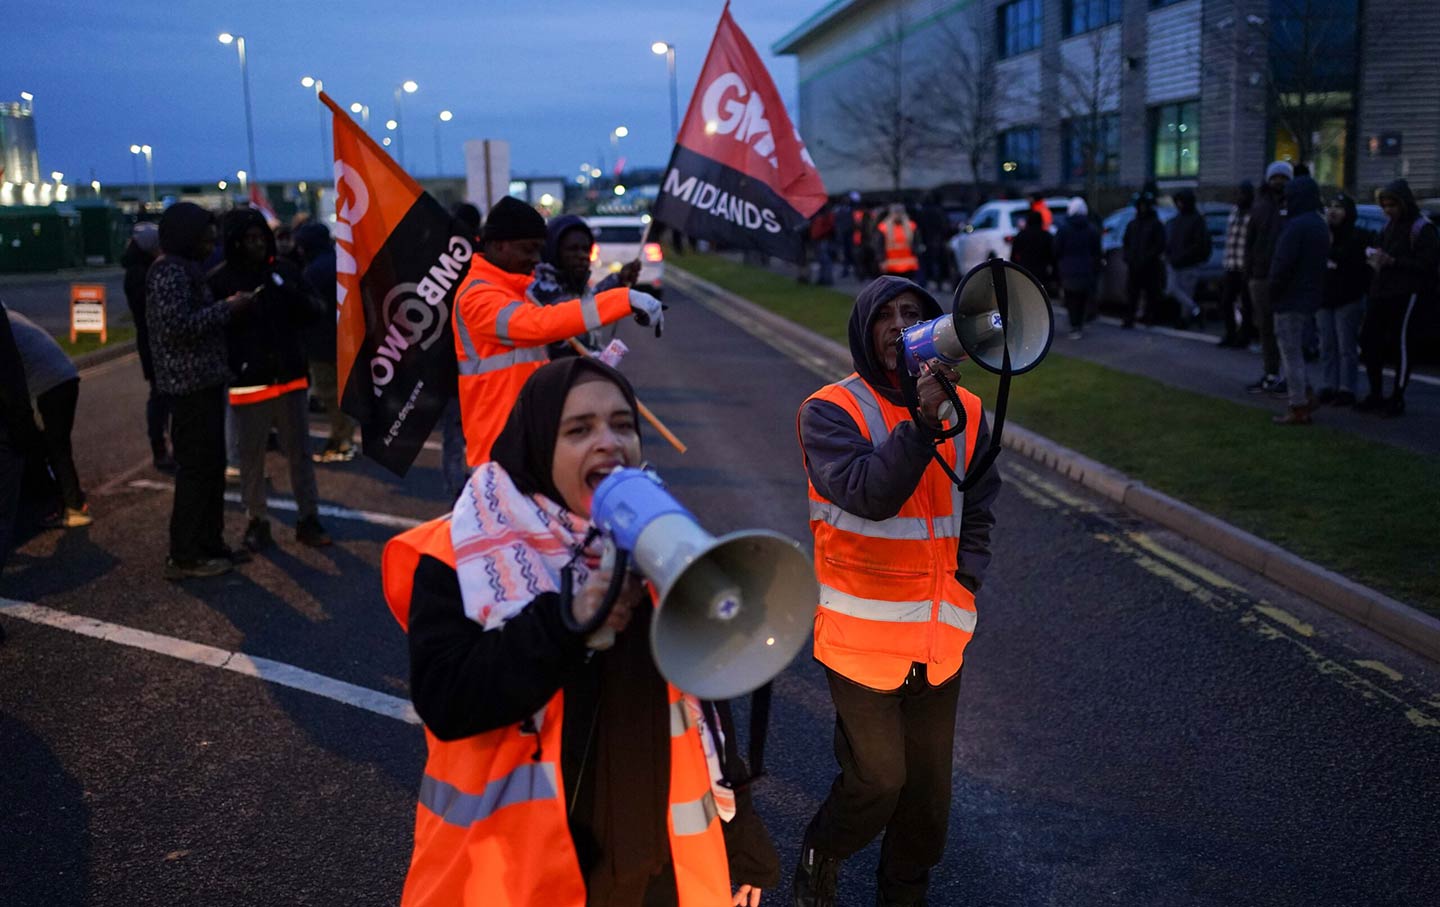 Members of the GMB union who work at Amazon picket outside the online retailer's site in Coventry.